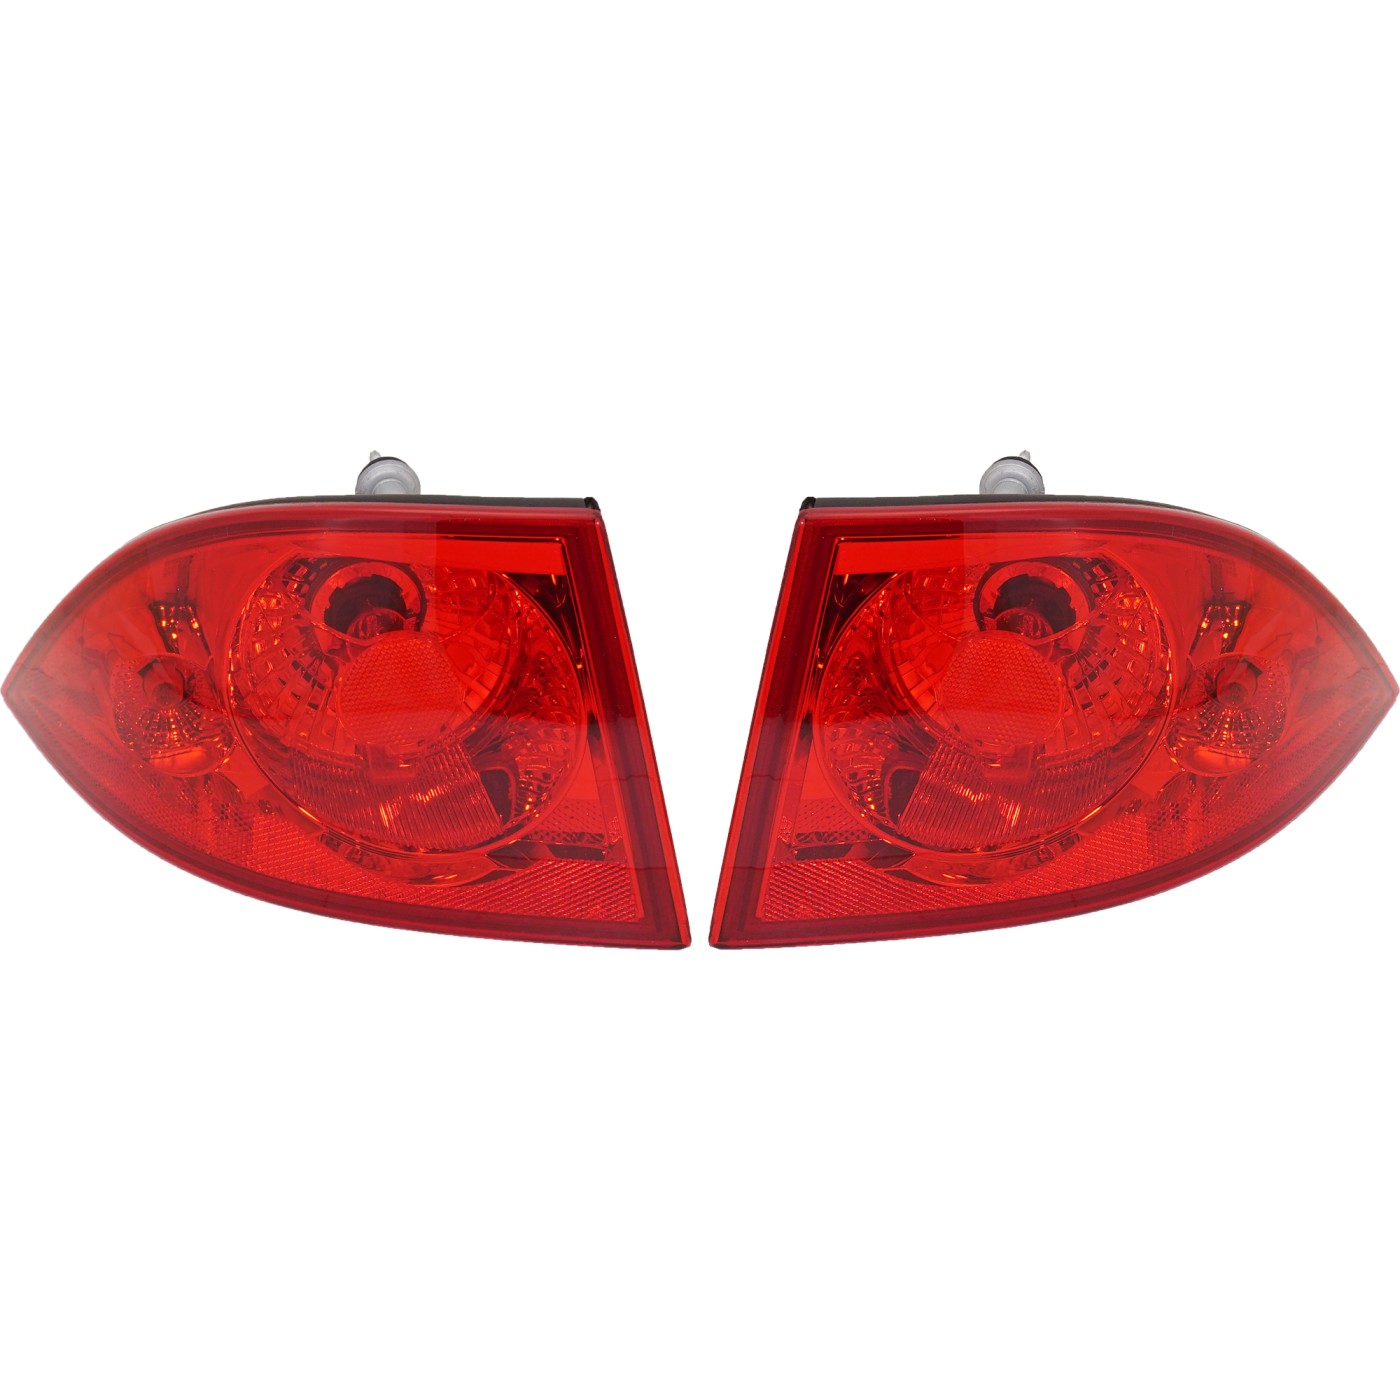 Set of 2 Tail Light For 2006-2008 Buick Lucerne CX LH & RH Outer w/ Bulb | eBay 2009 Buick Lucerne Brake Light Bulb Replacement